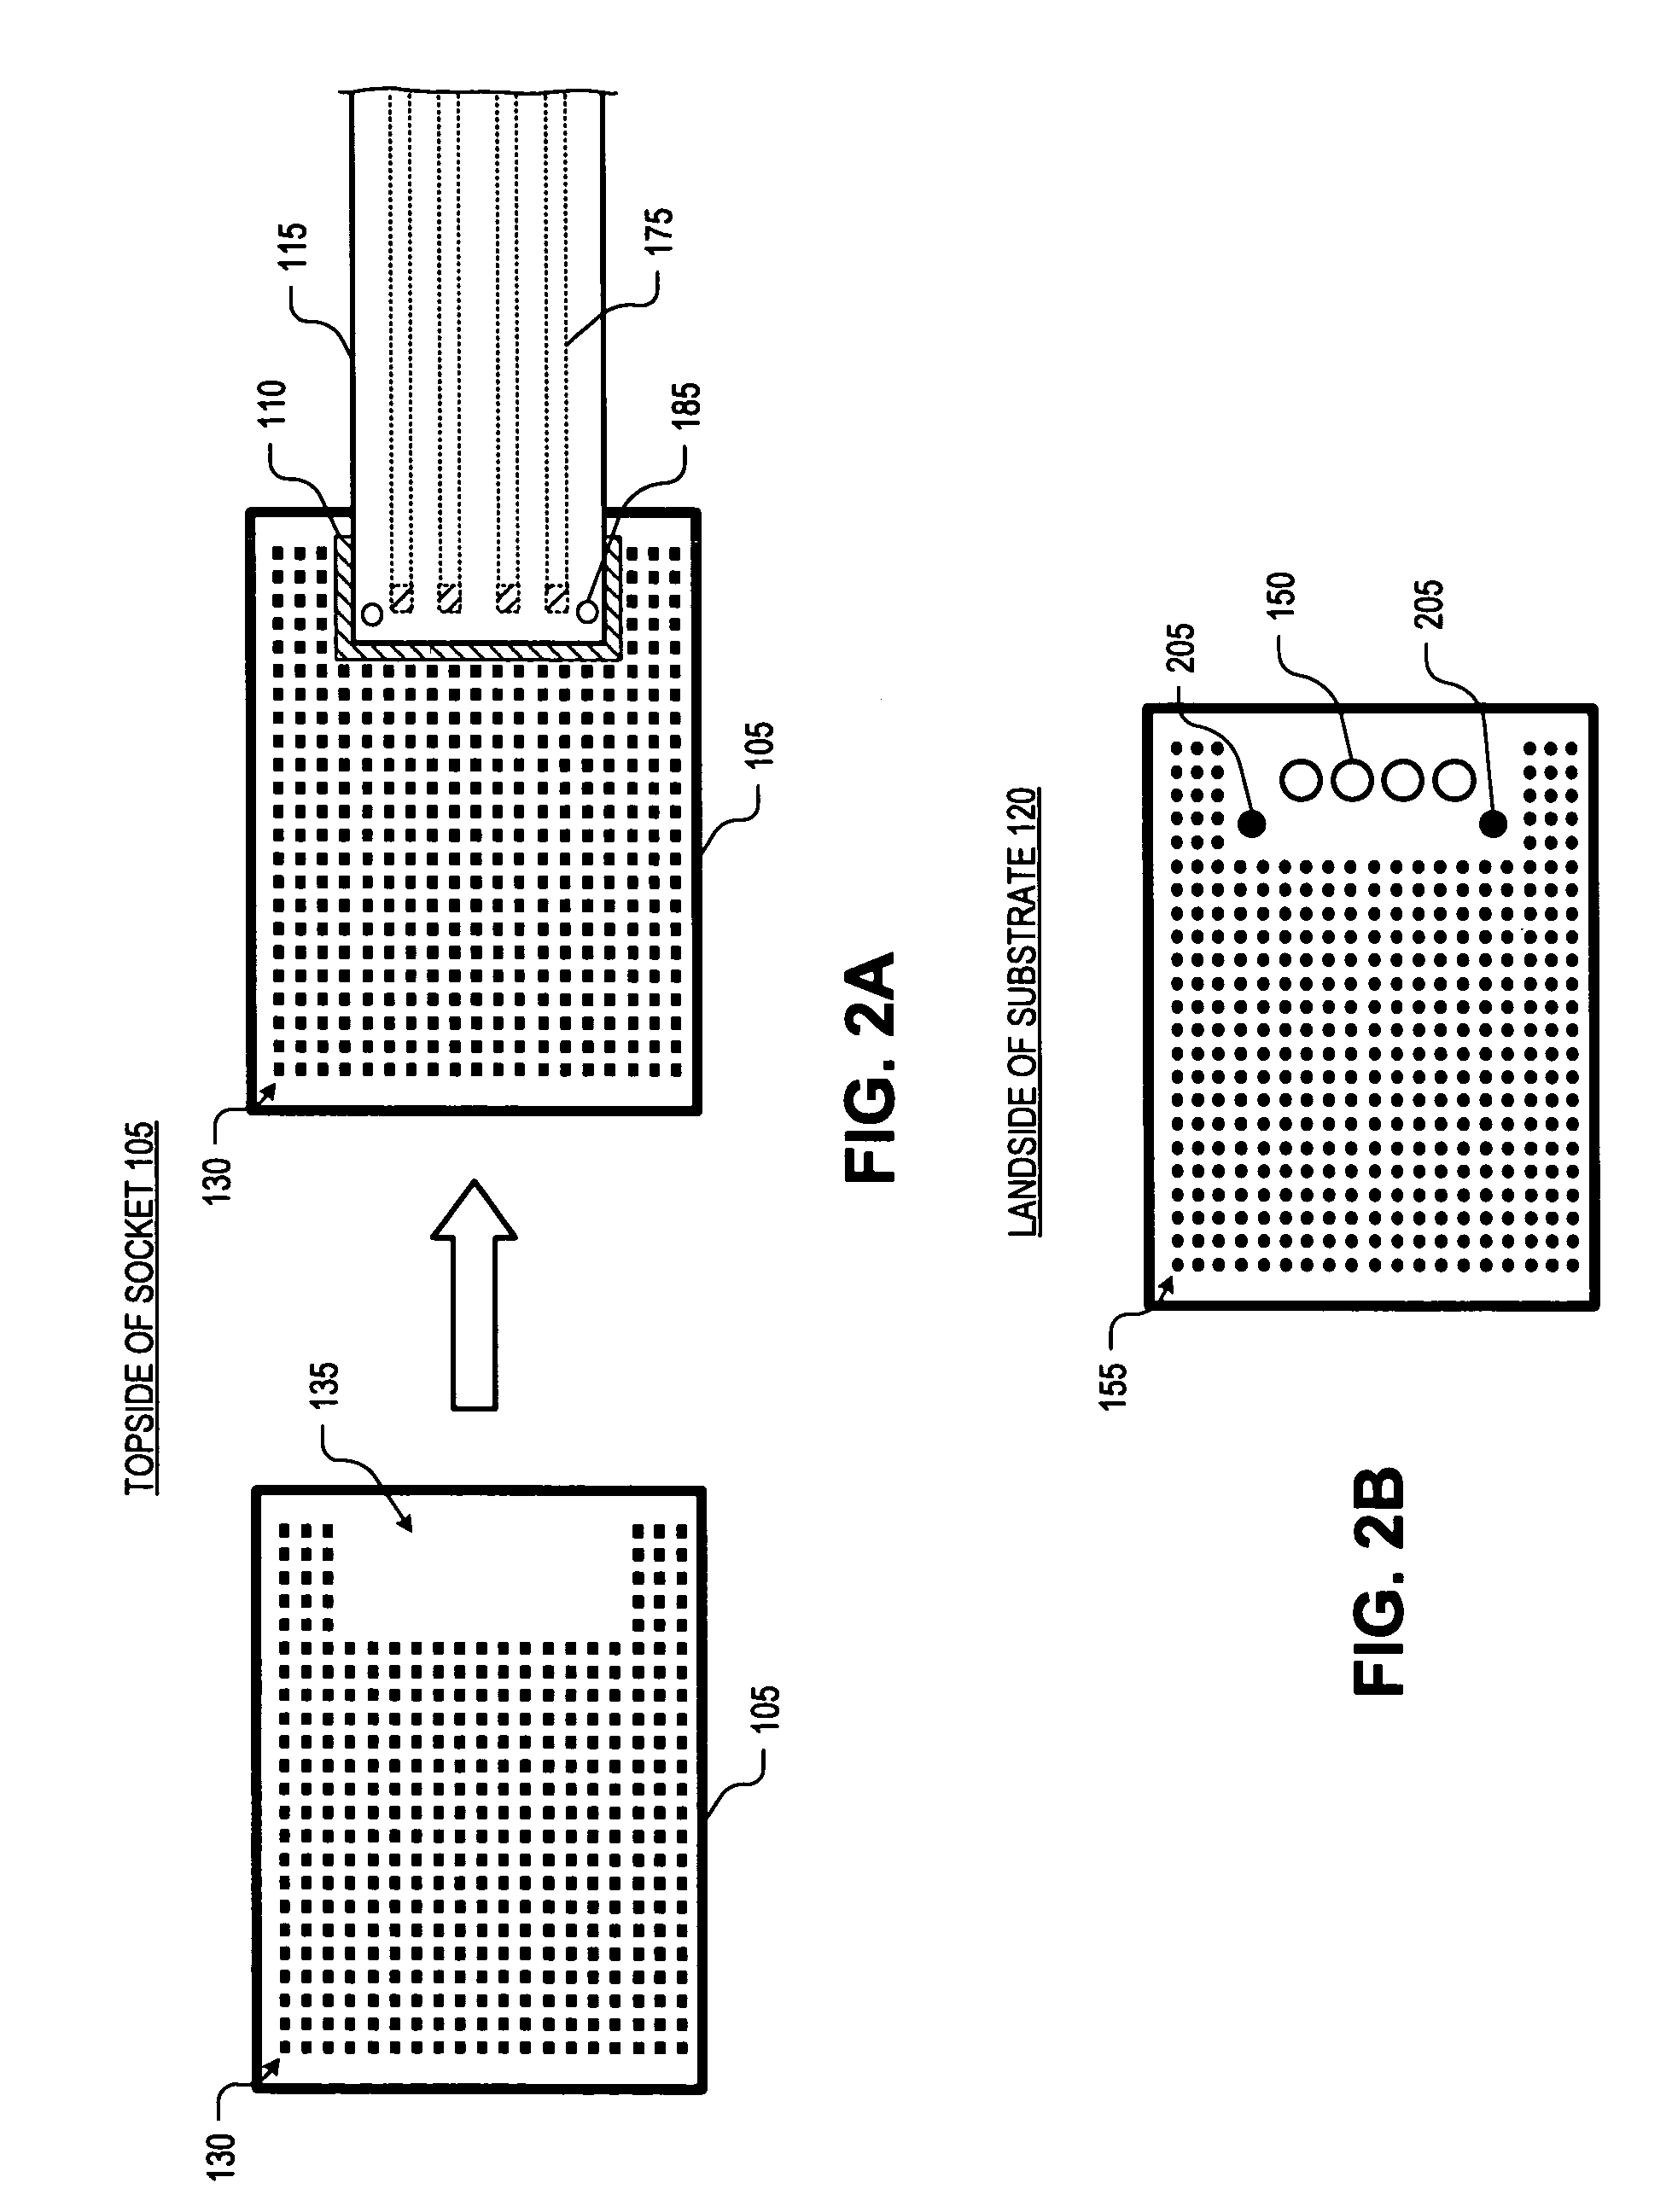 Chip-to-chip optical interconnect